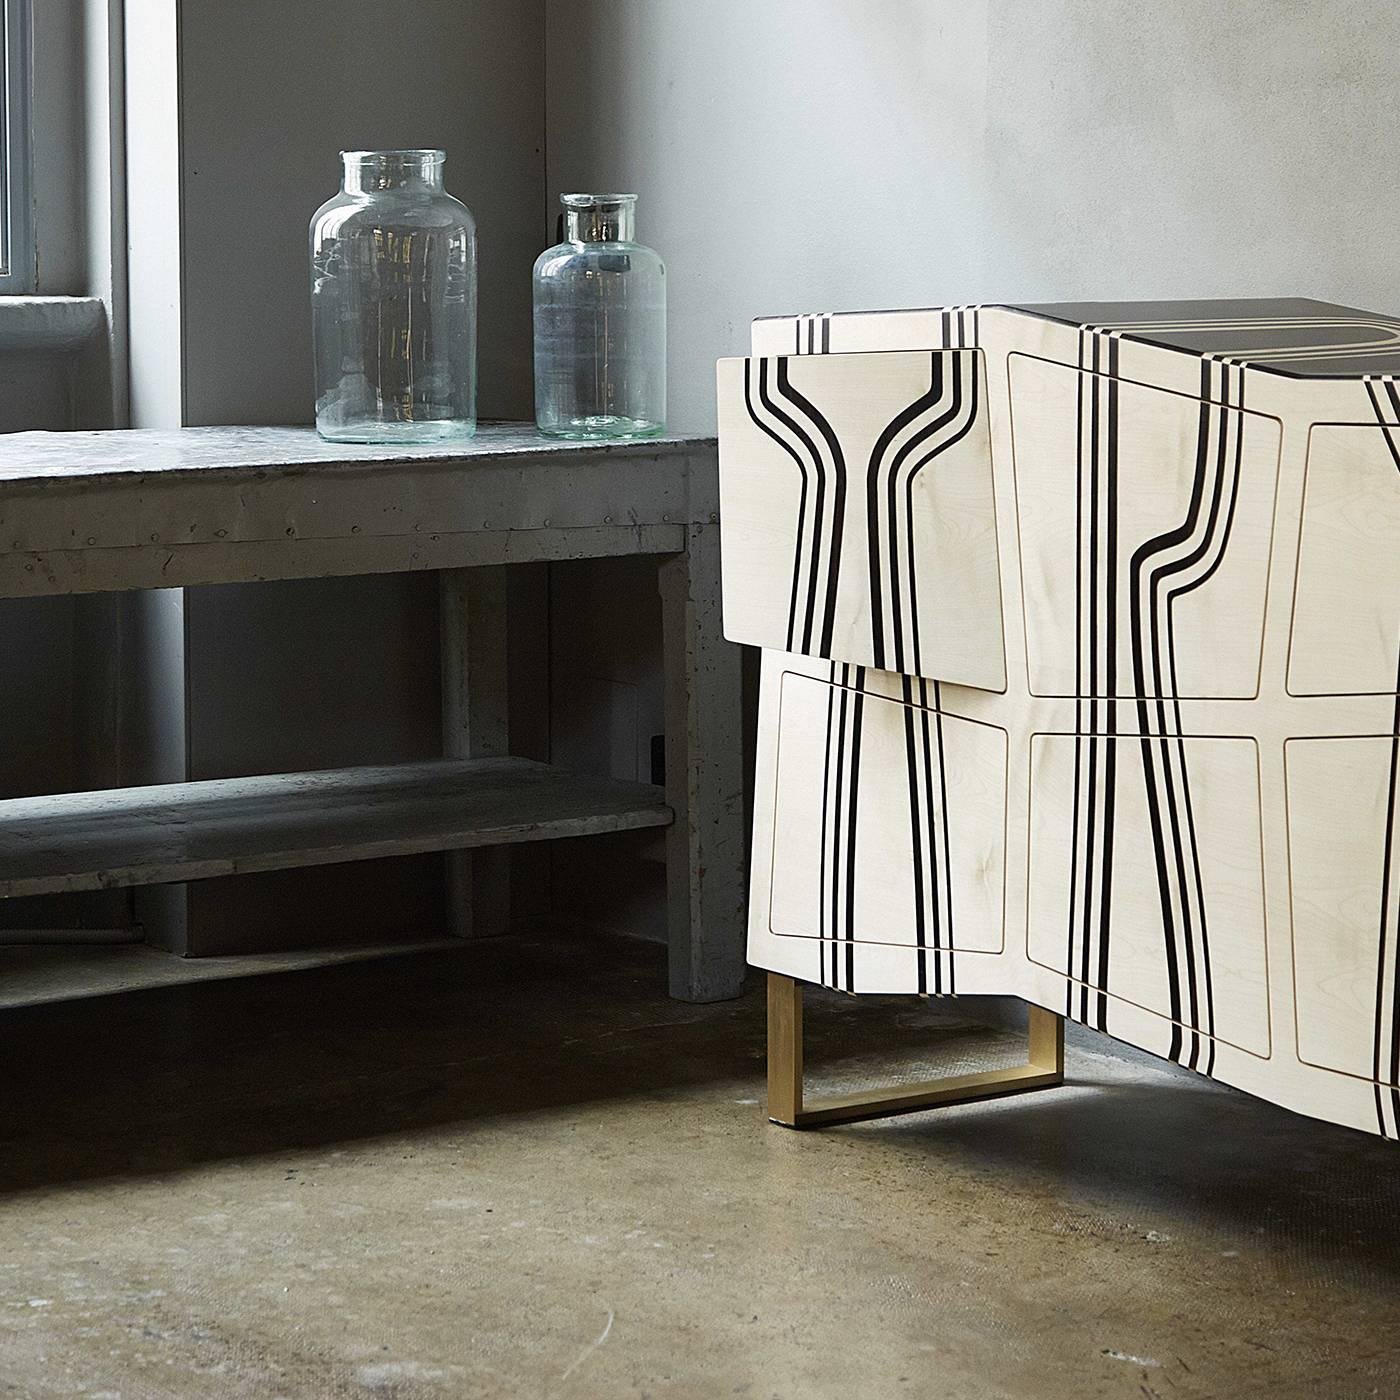 The unique and complex design of this eye-catching cabinet seems to challenge the classic tradition of cabinetmaking with its unexpected geometrical silhouette. Crafted entirely of maple wood, the frame is characterized by sharp and uneven lines